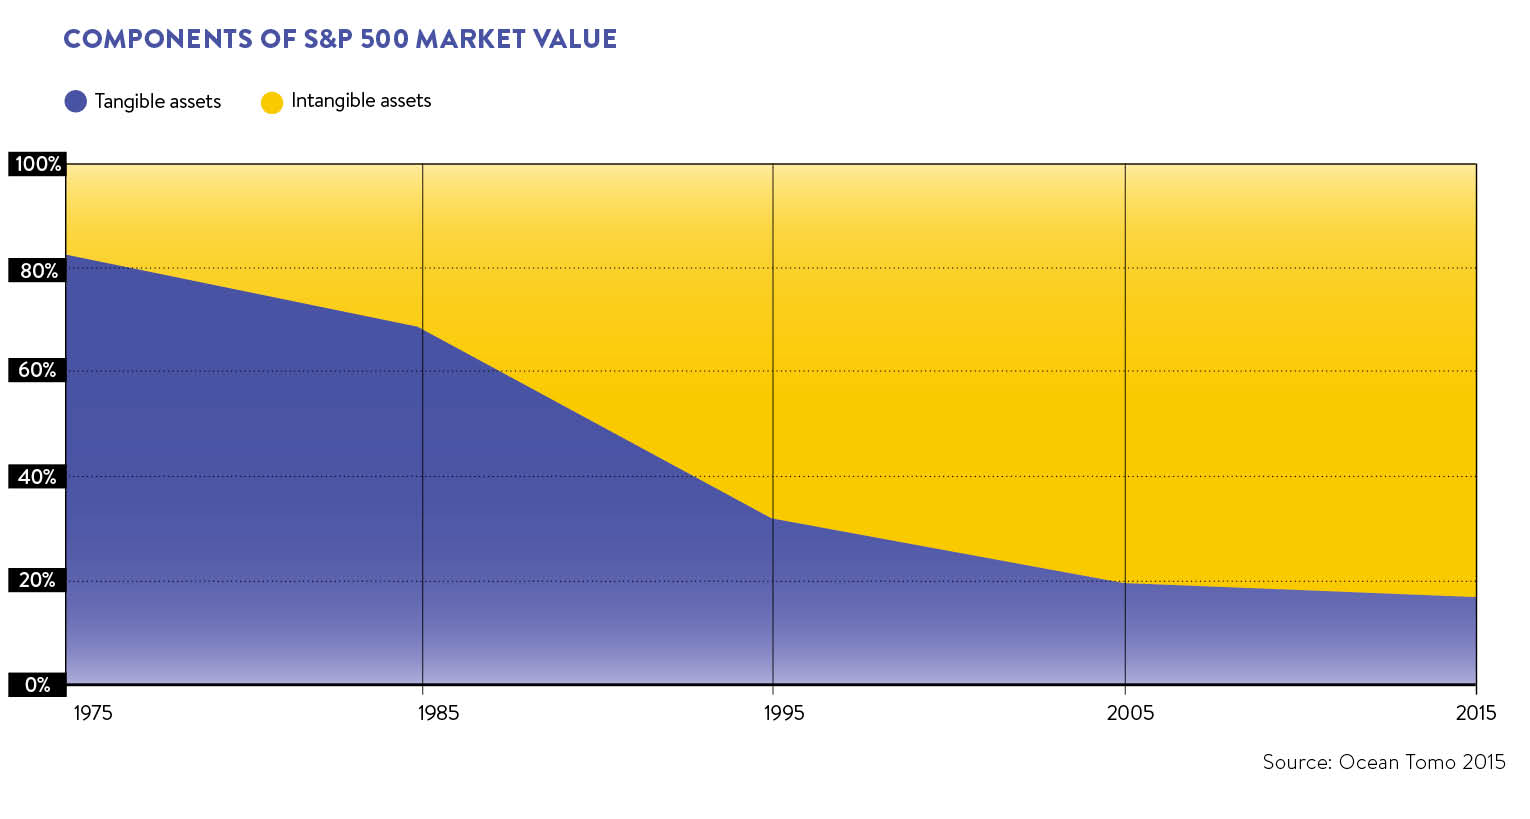 Components of S&P 500 market value